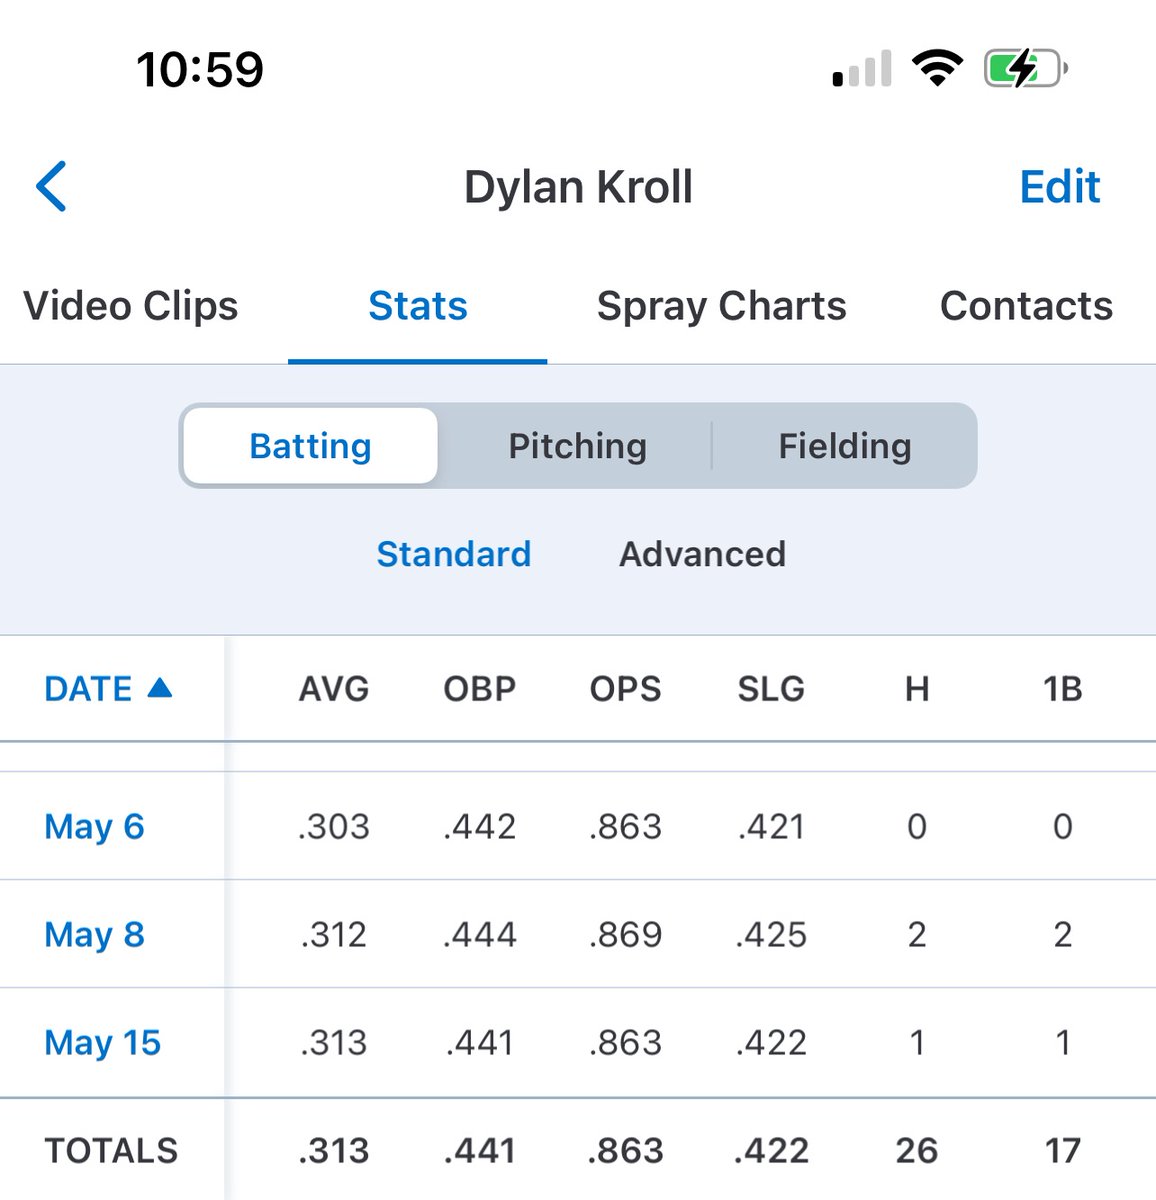 Final end of season stats, team finished with a final record of 18-8
Final Stats:
.313 BA
.441 OBP
.863 OPS
2.73 ERA
1.14 WHIP
40 K's
@N2SportsTonka @CEShowcase_ @jucoroute @BUncommitted @Bsbclips @EliahMac23_HC